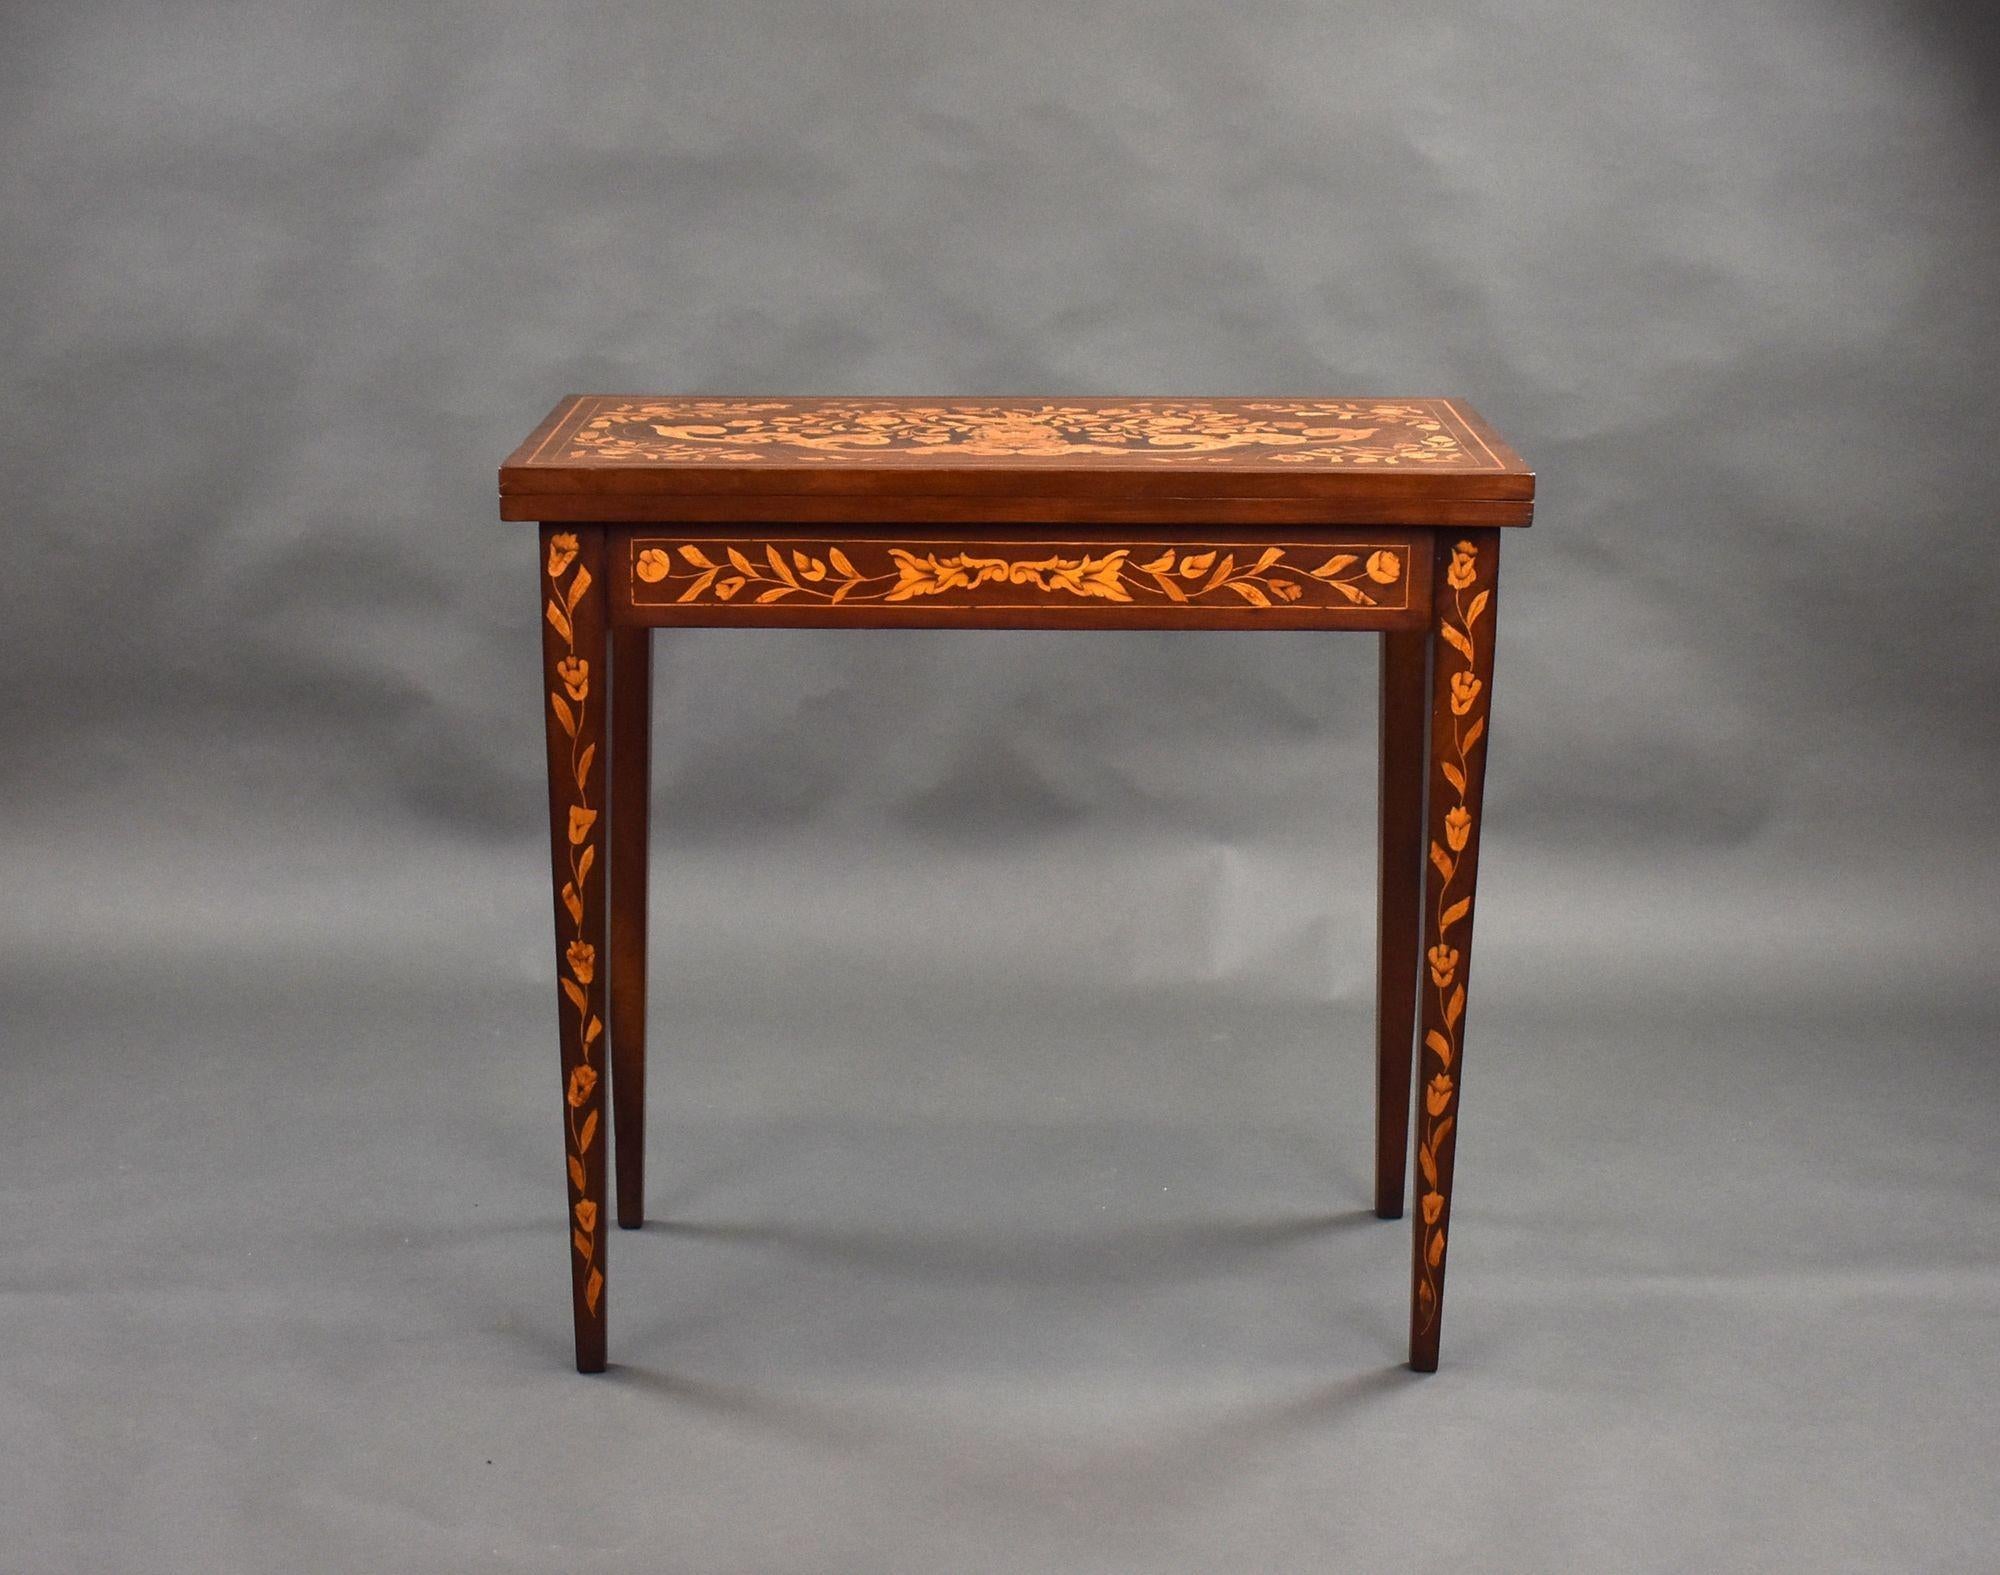 For sale is a good quality 19th century Dutch marquetry card table, profusely inlaid throughout, the top swivels and folds over to reveal a green playing surface along with further inlays depicting playing cards. The table stands on tapered legs and